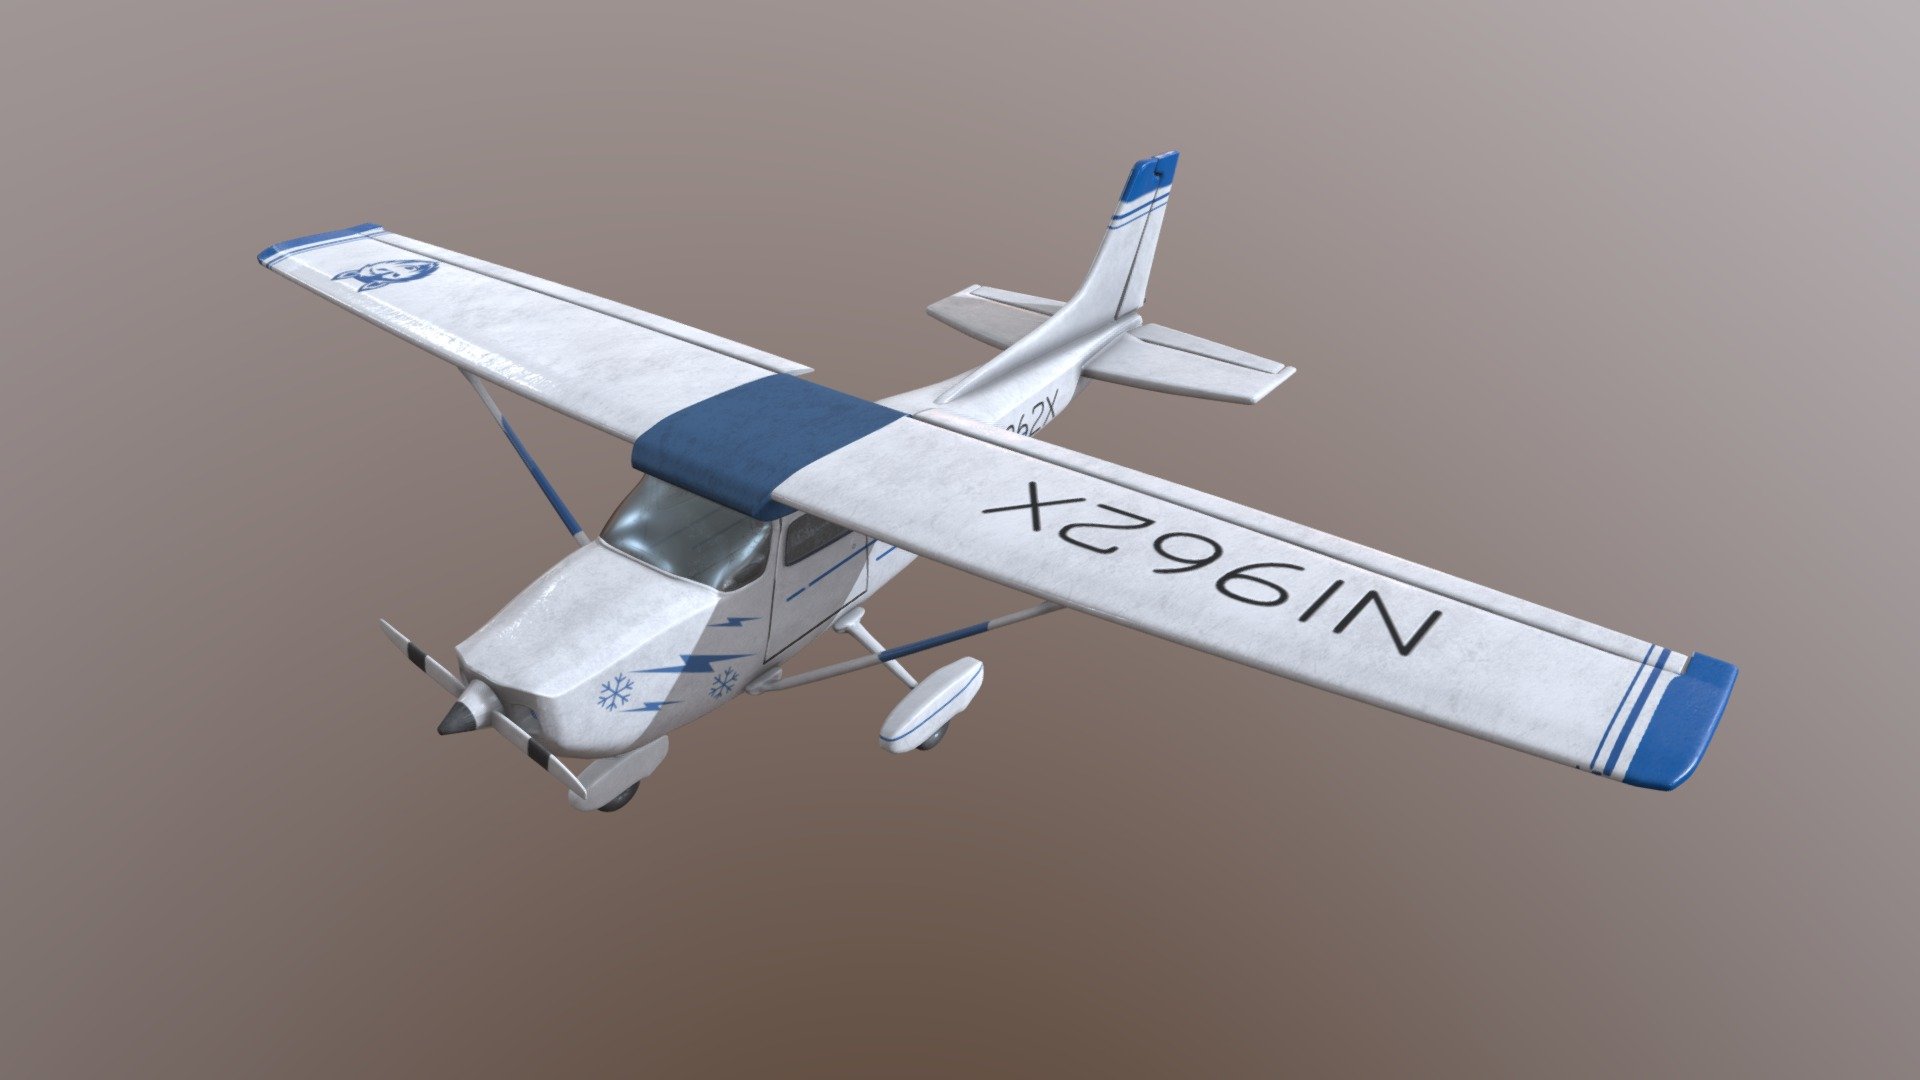 Cessna  C-172  bluee design

Rotor, wings, stabilizators all with origins for animation ready. 

Blender 2.9 modeled
Blender 2.9 modeled
Substance painter original textures 2k res. 
Realstic scale asset and game ready.
Download includes:
2k &amp; 4k PBR textures
.blend file
.fbx - Cessna  C-172  bluee design - Buy Royalty Free 3D model by Thomas Binder (@bindertom61) 3d model